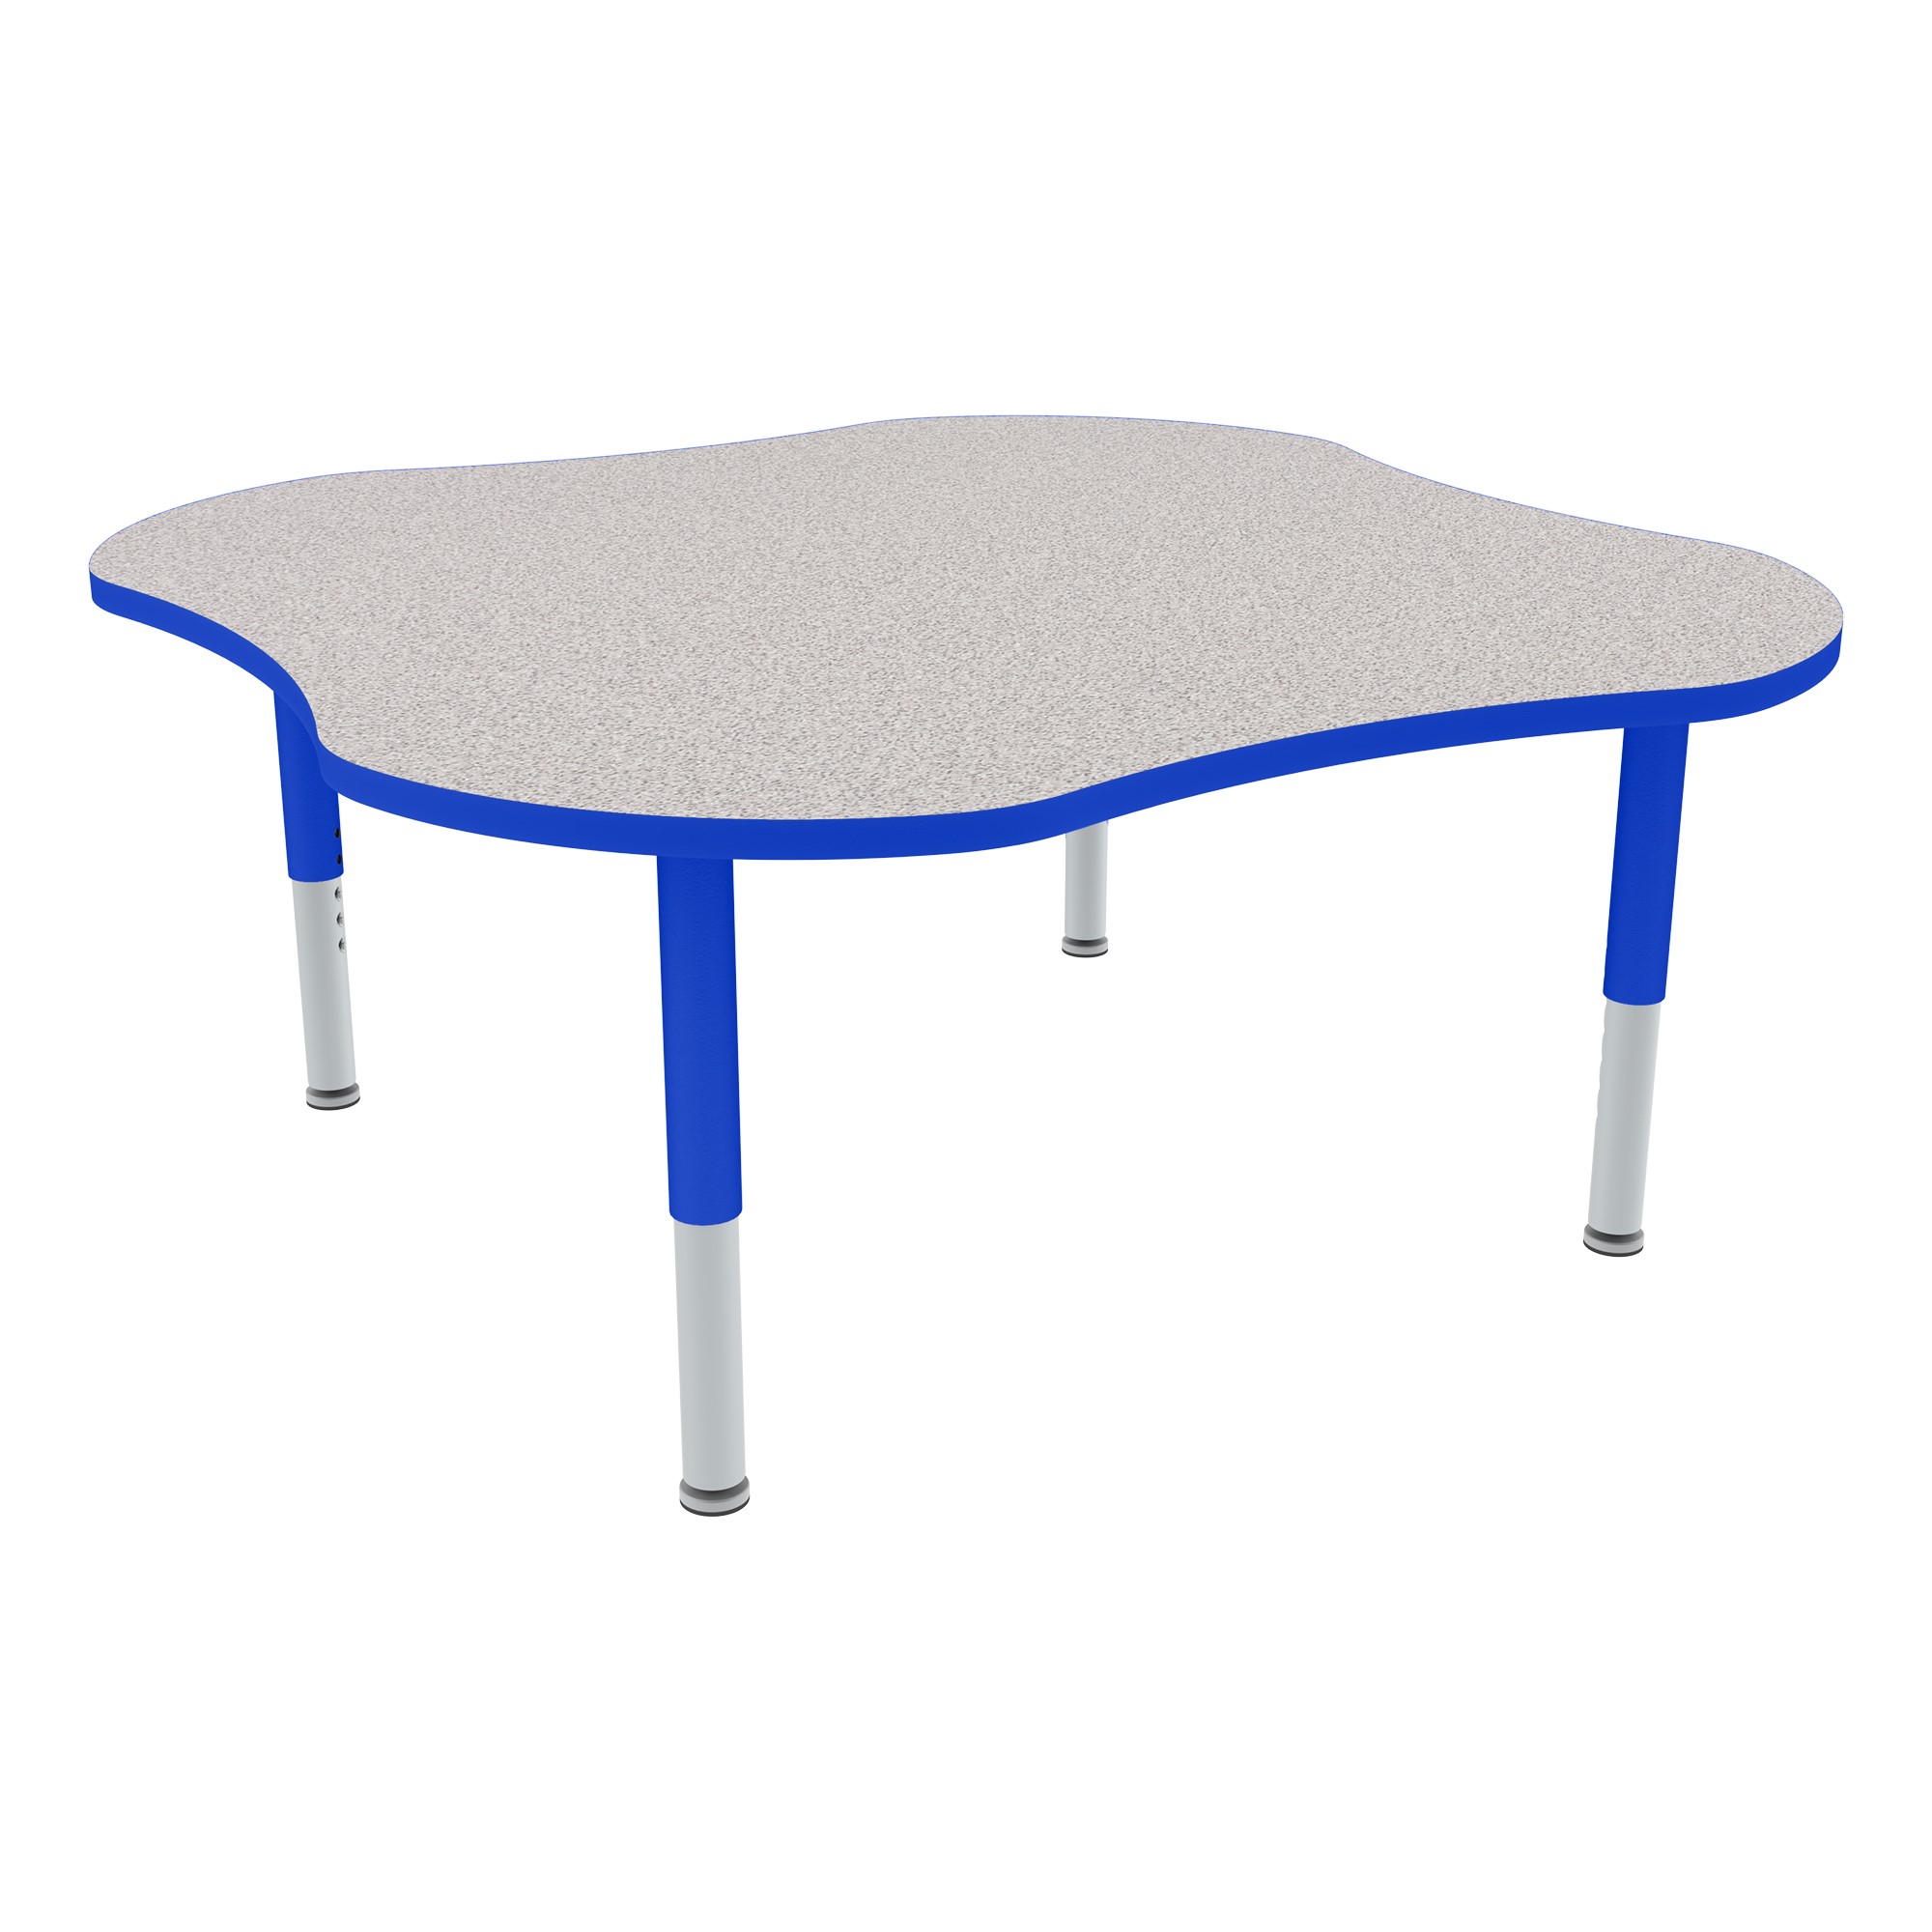 Toddler Legs Gray Top and Blue Edge FDP Rectangle Activity School and Classroom Kids Table 30 x 72 inch Adjustable Height 15-24 inches